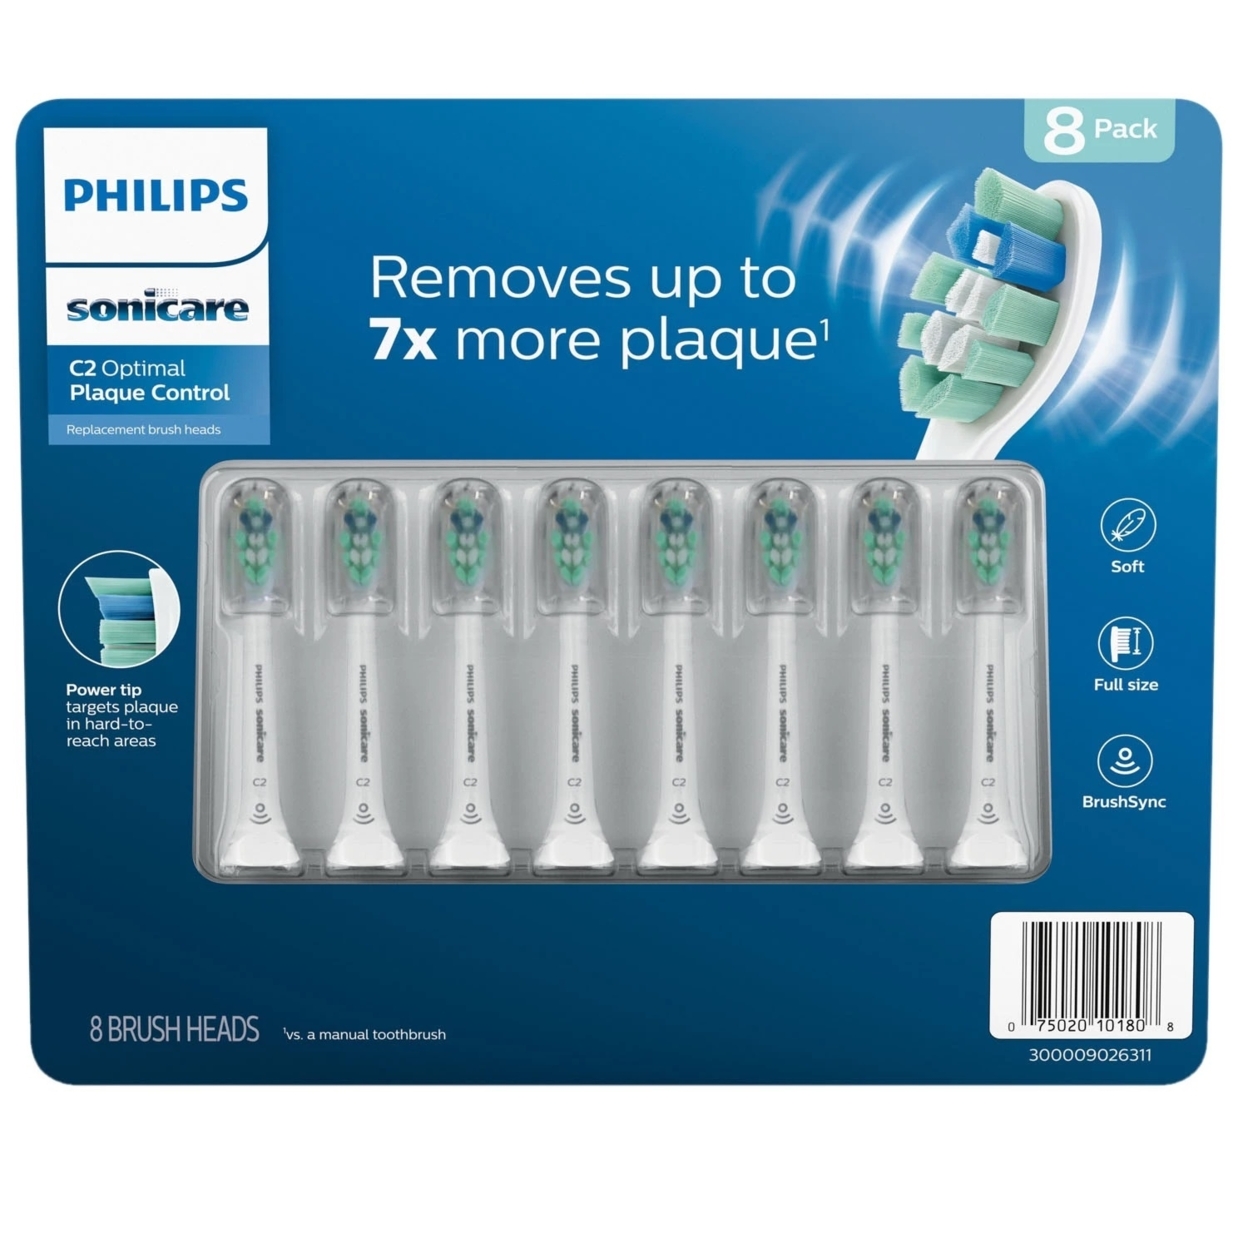 Philips Sonicare Optimal Plaque Control Replacement Brush Heads (8 Count)